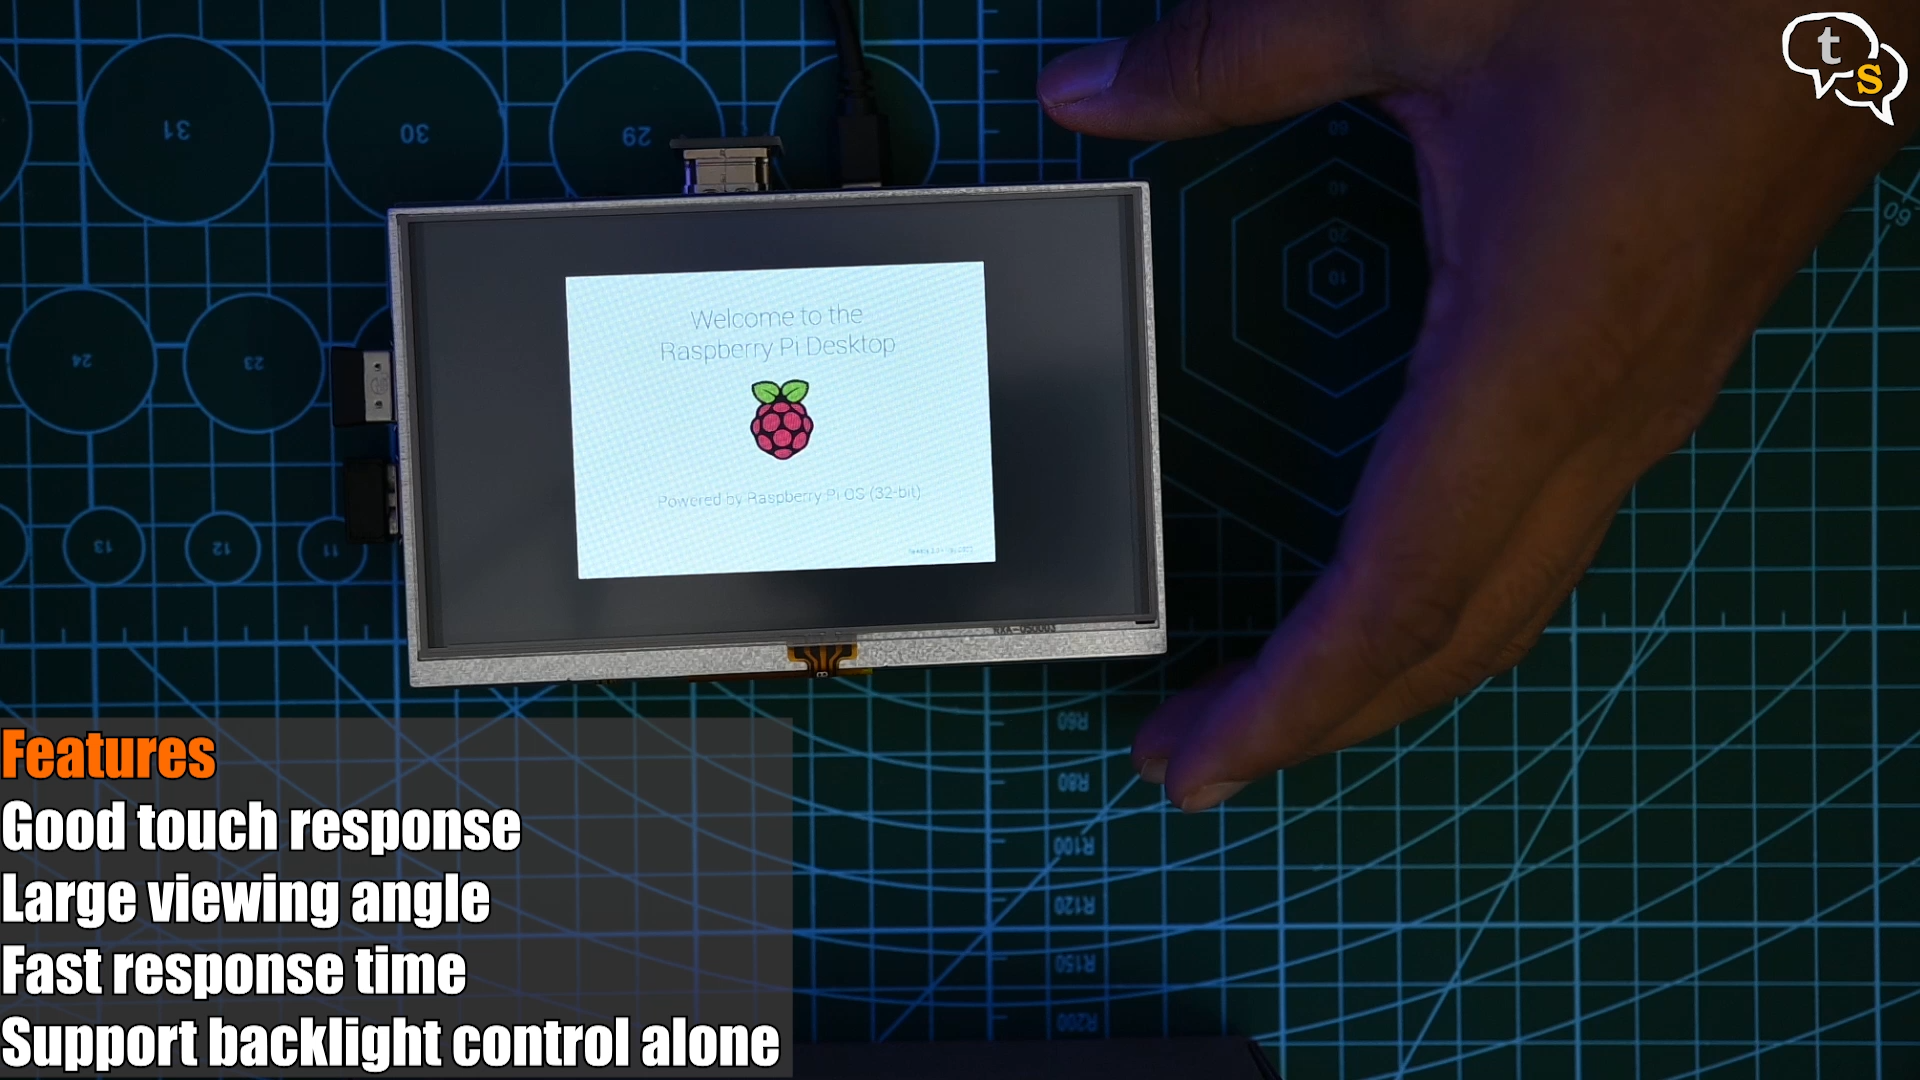 Raspberry Pi, 5 inch touchscreen display now active